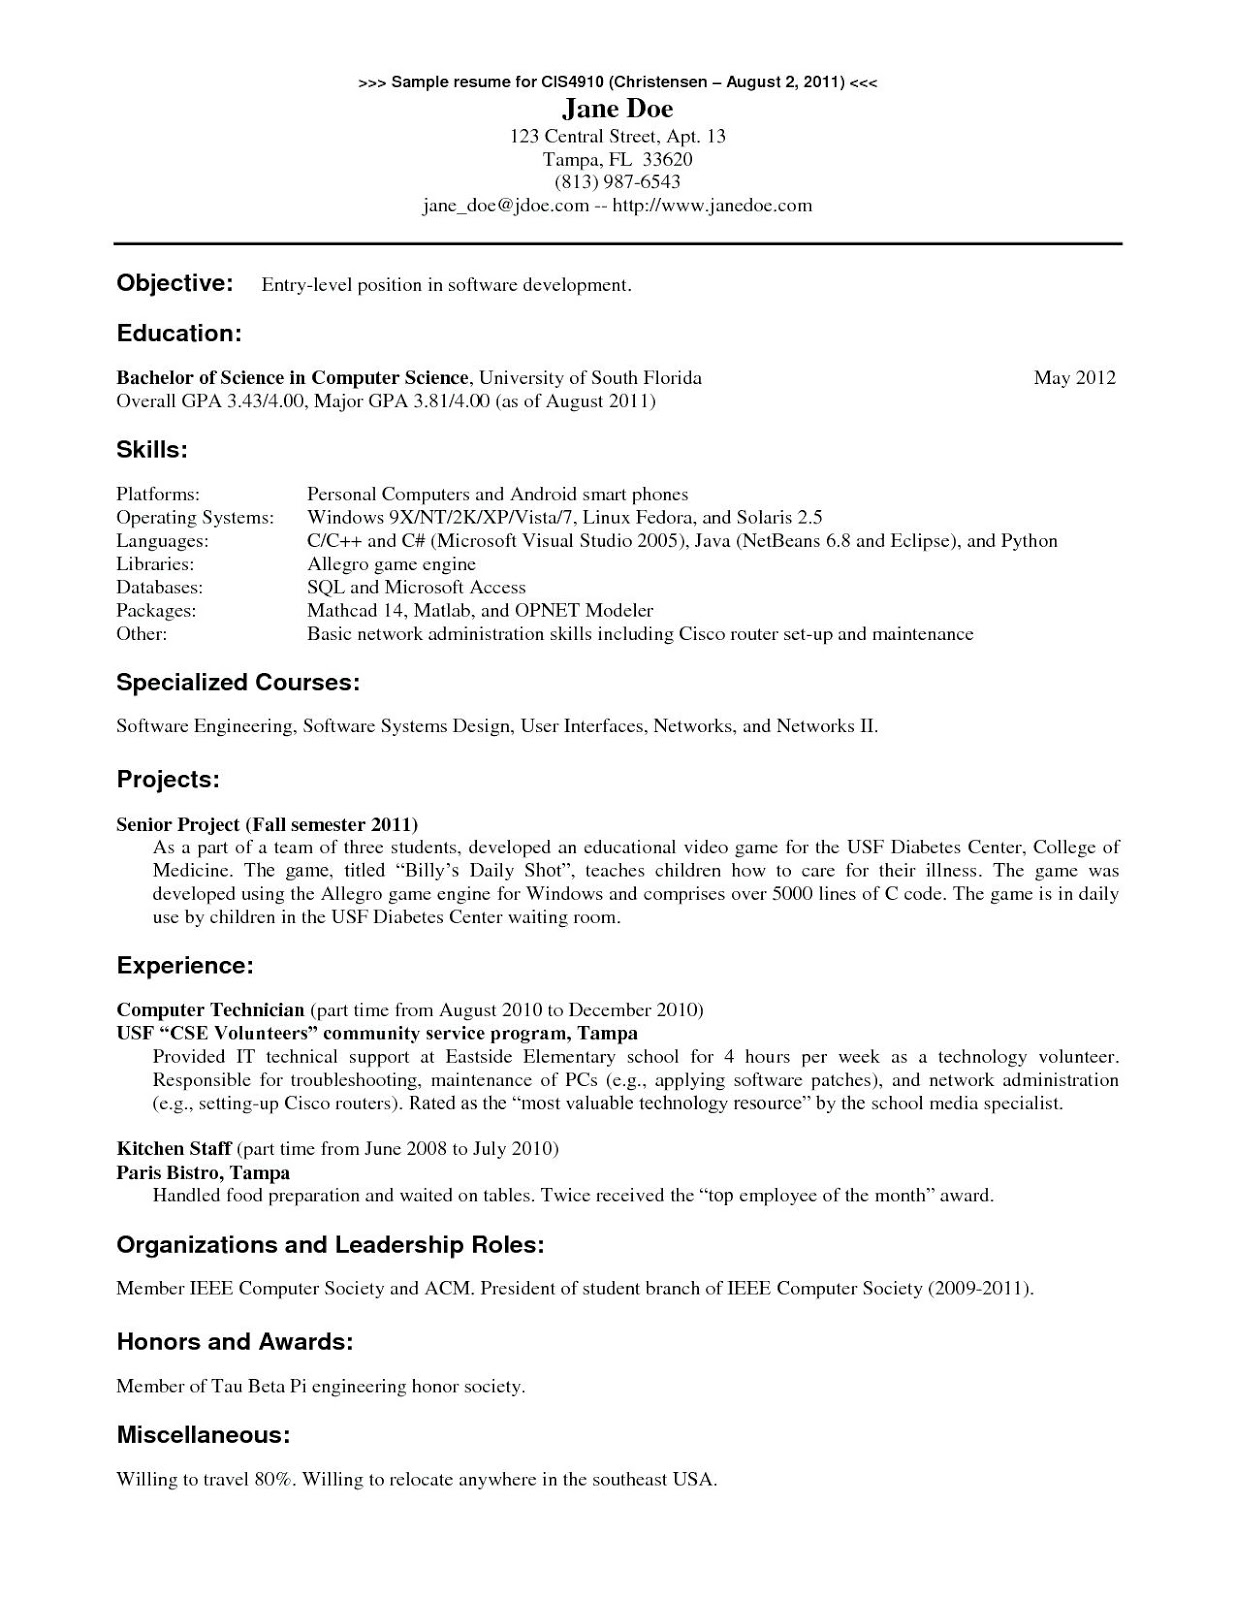 food service resume objective examples, food service supervisor resume objective examples 2019 , resume objective examples for food service , general resume objective examples food service,